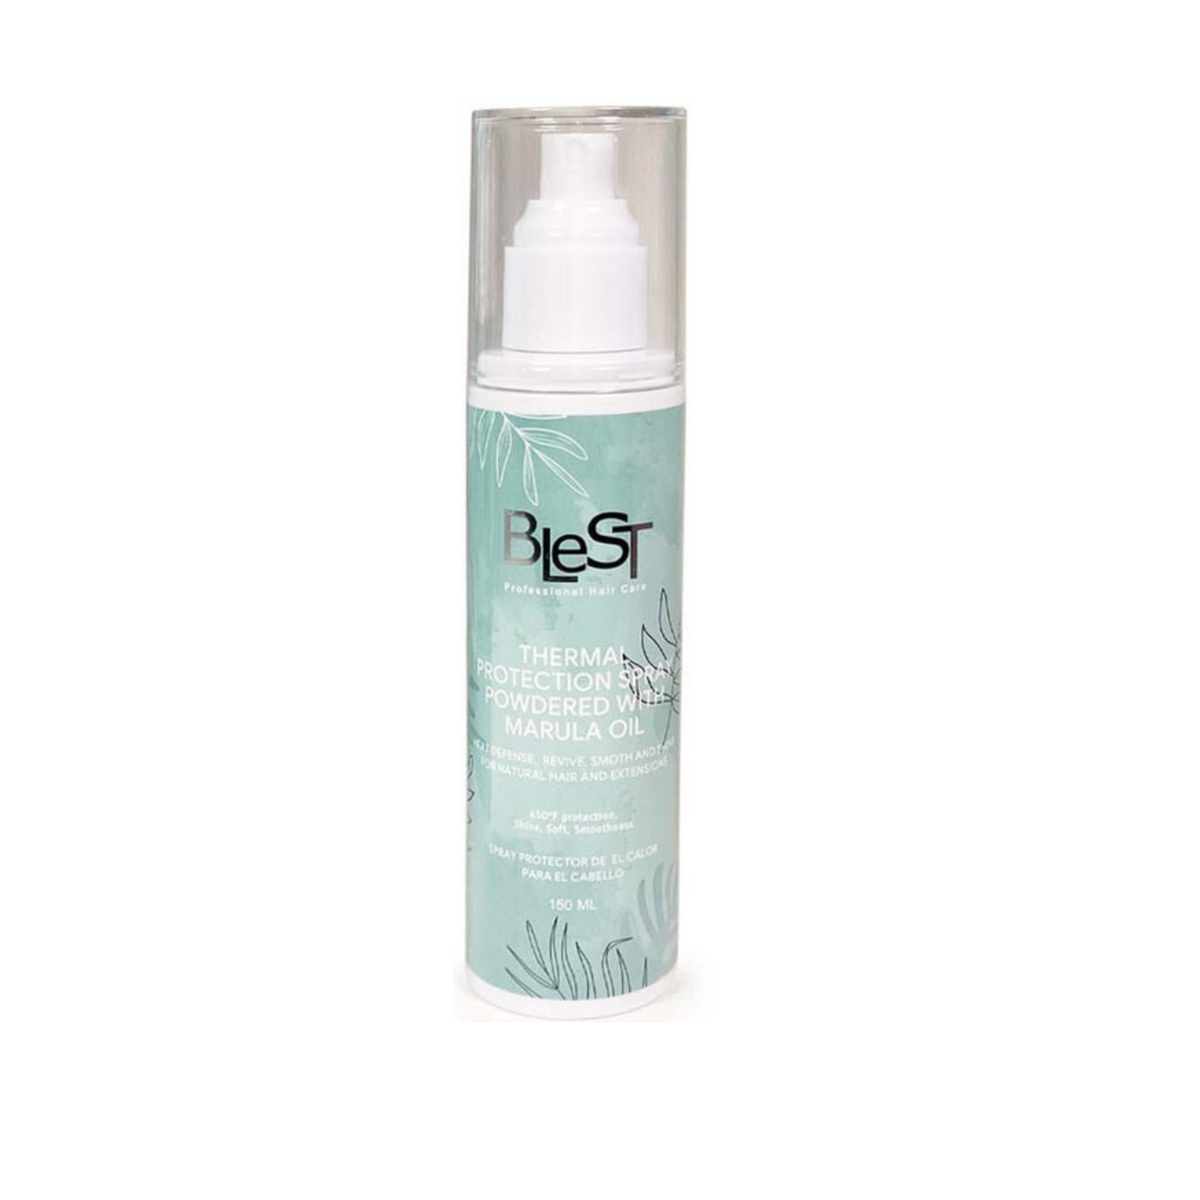 THERMAL PROTECTION SPRAY  BLEST - PROFESSIONAL HAIR CARE (1PC)